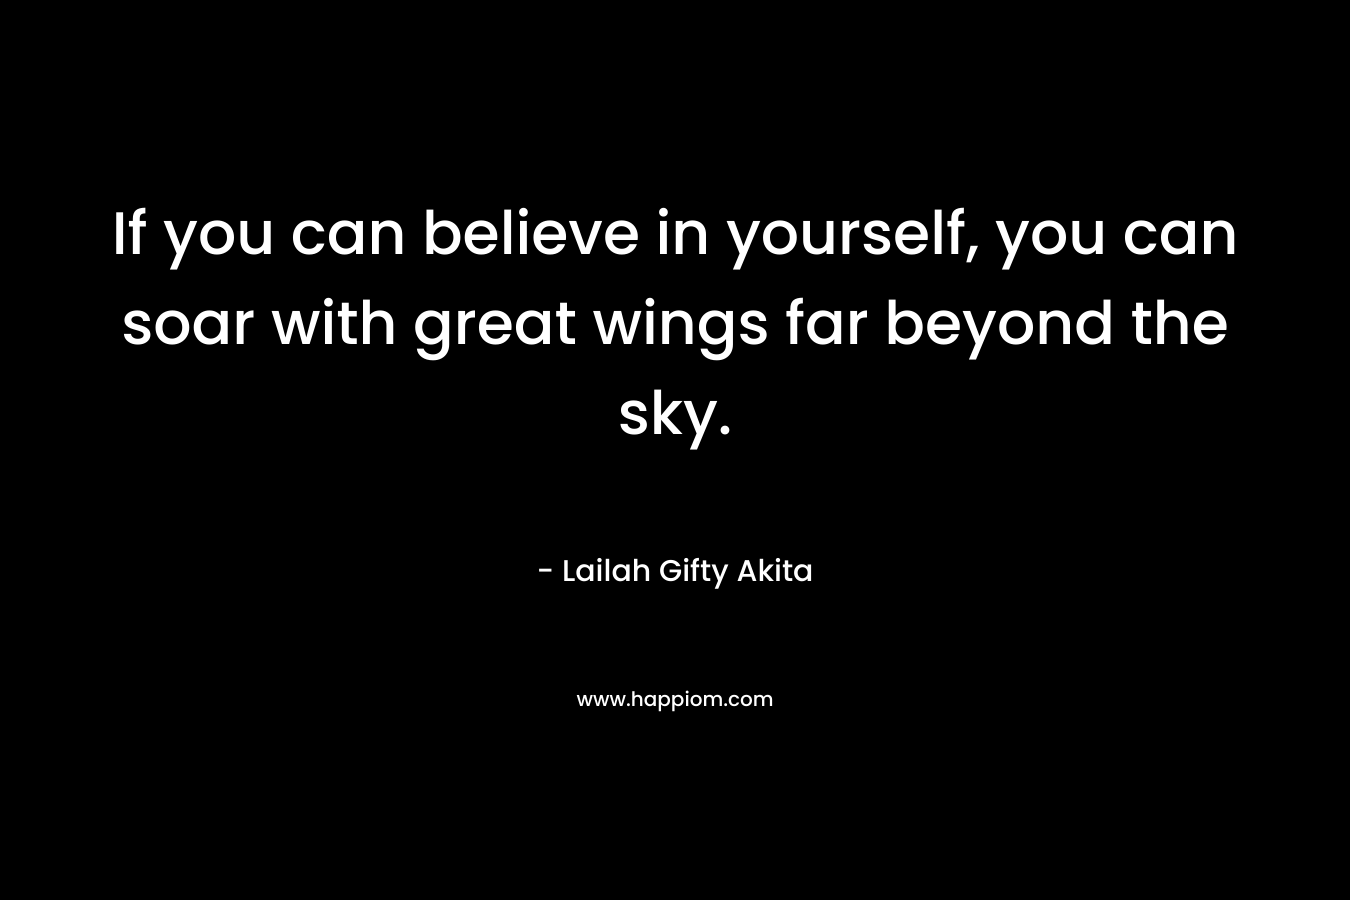 If you can believe in yourself, you can soar with great wings far beyond the sky.